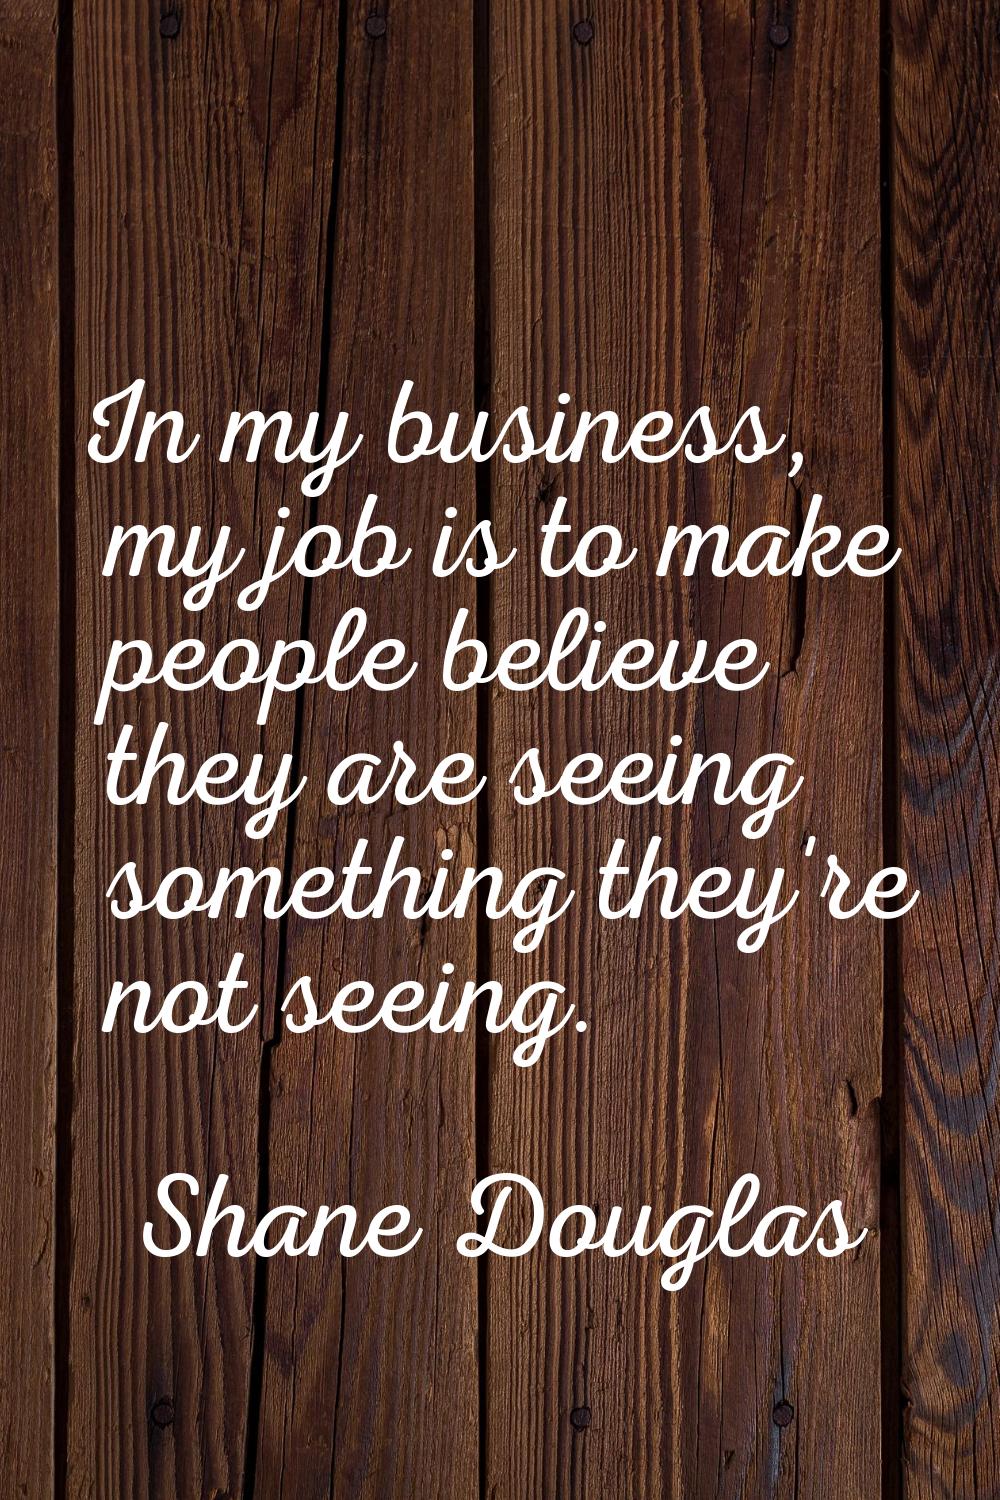 In my business, my job is to make people believe they are seeing something they're not seeing.